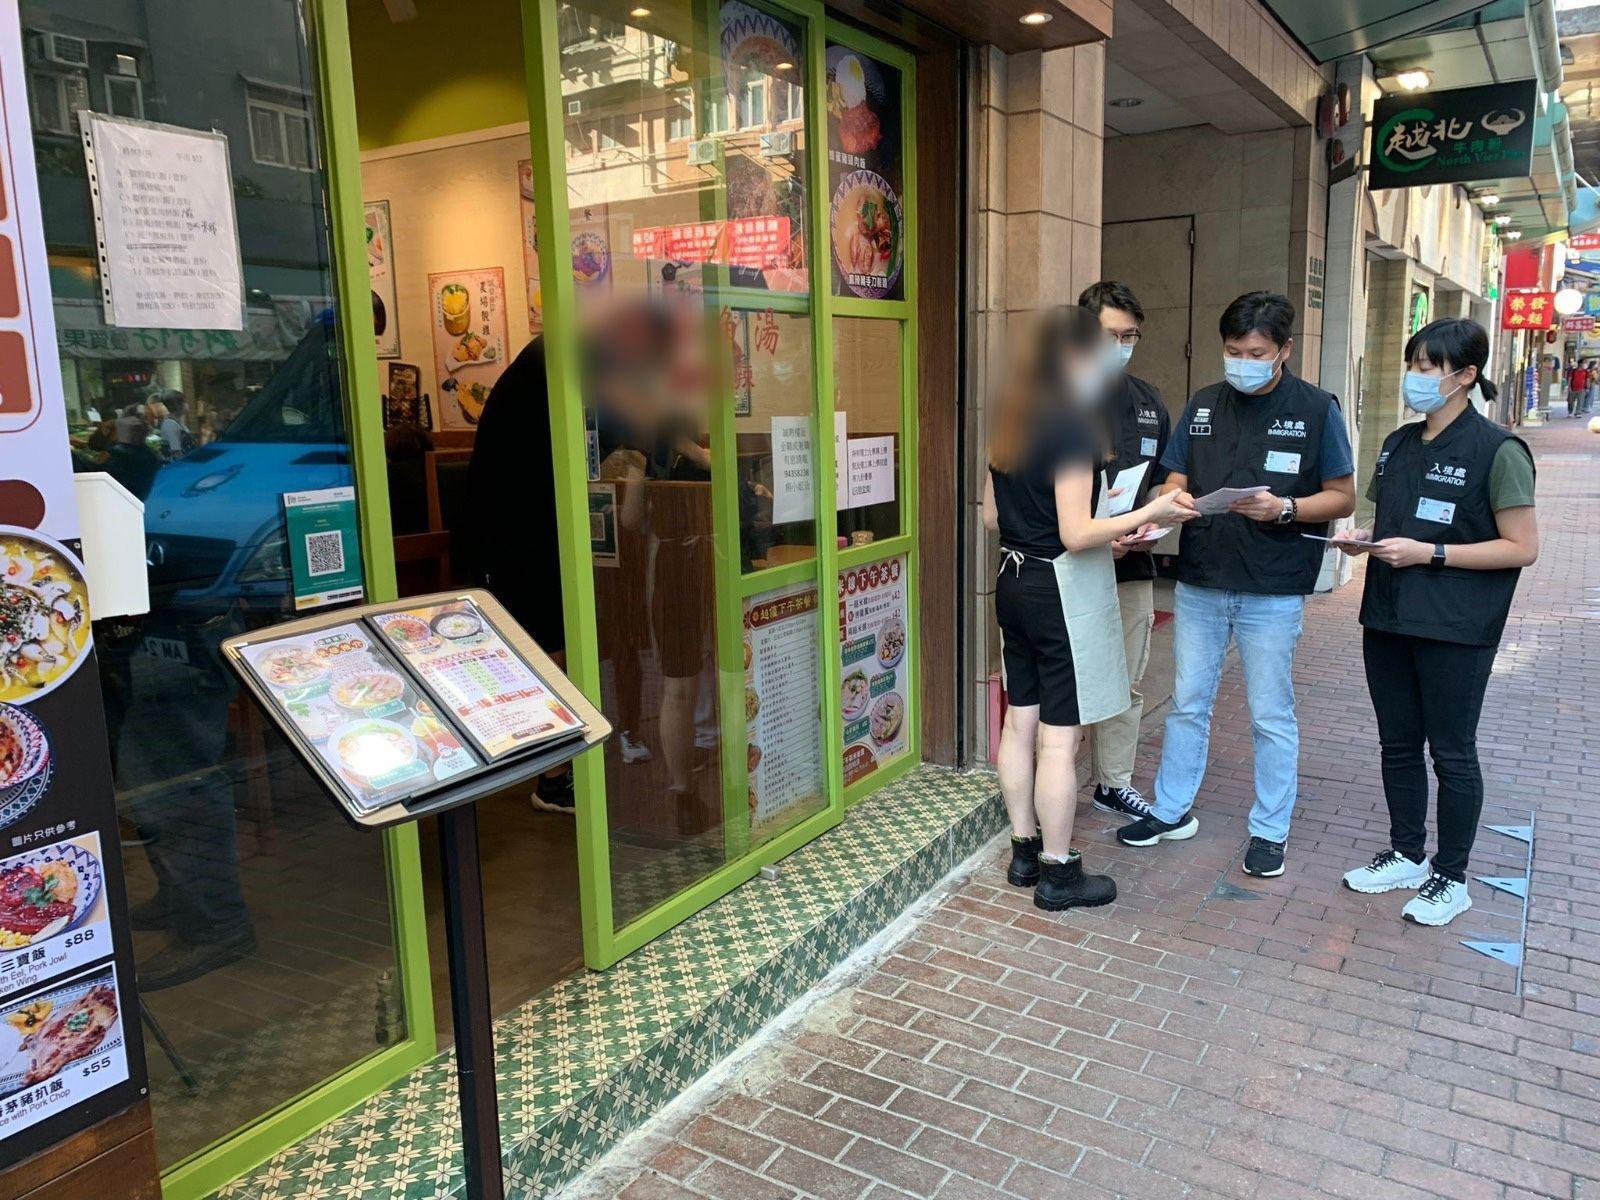 The Immigration Department mounted a series of    territory-wide anti-illegal worker operations codenamed "Breakthrough" and "Twilight" for four consecutive days from November 6 to today (November 9). Photo shows Immigration investigation sub-division officers distributing "Don't Employ Illegal Workers" leaflets to restaurant staff.